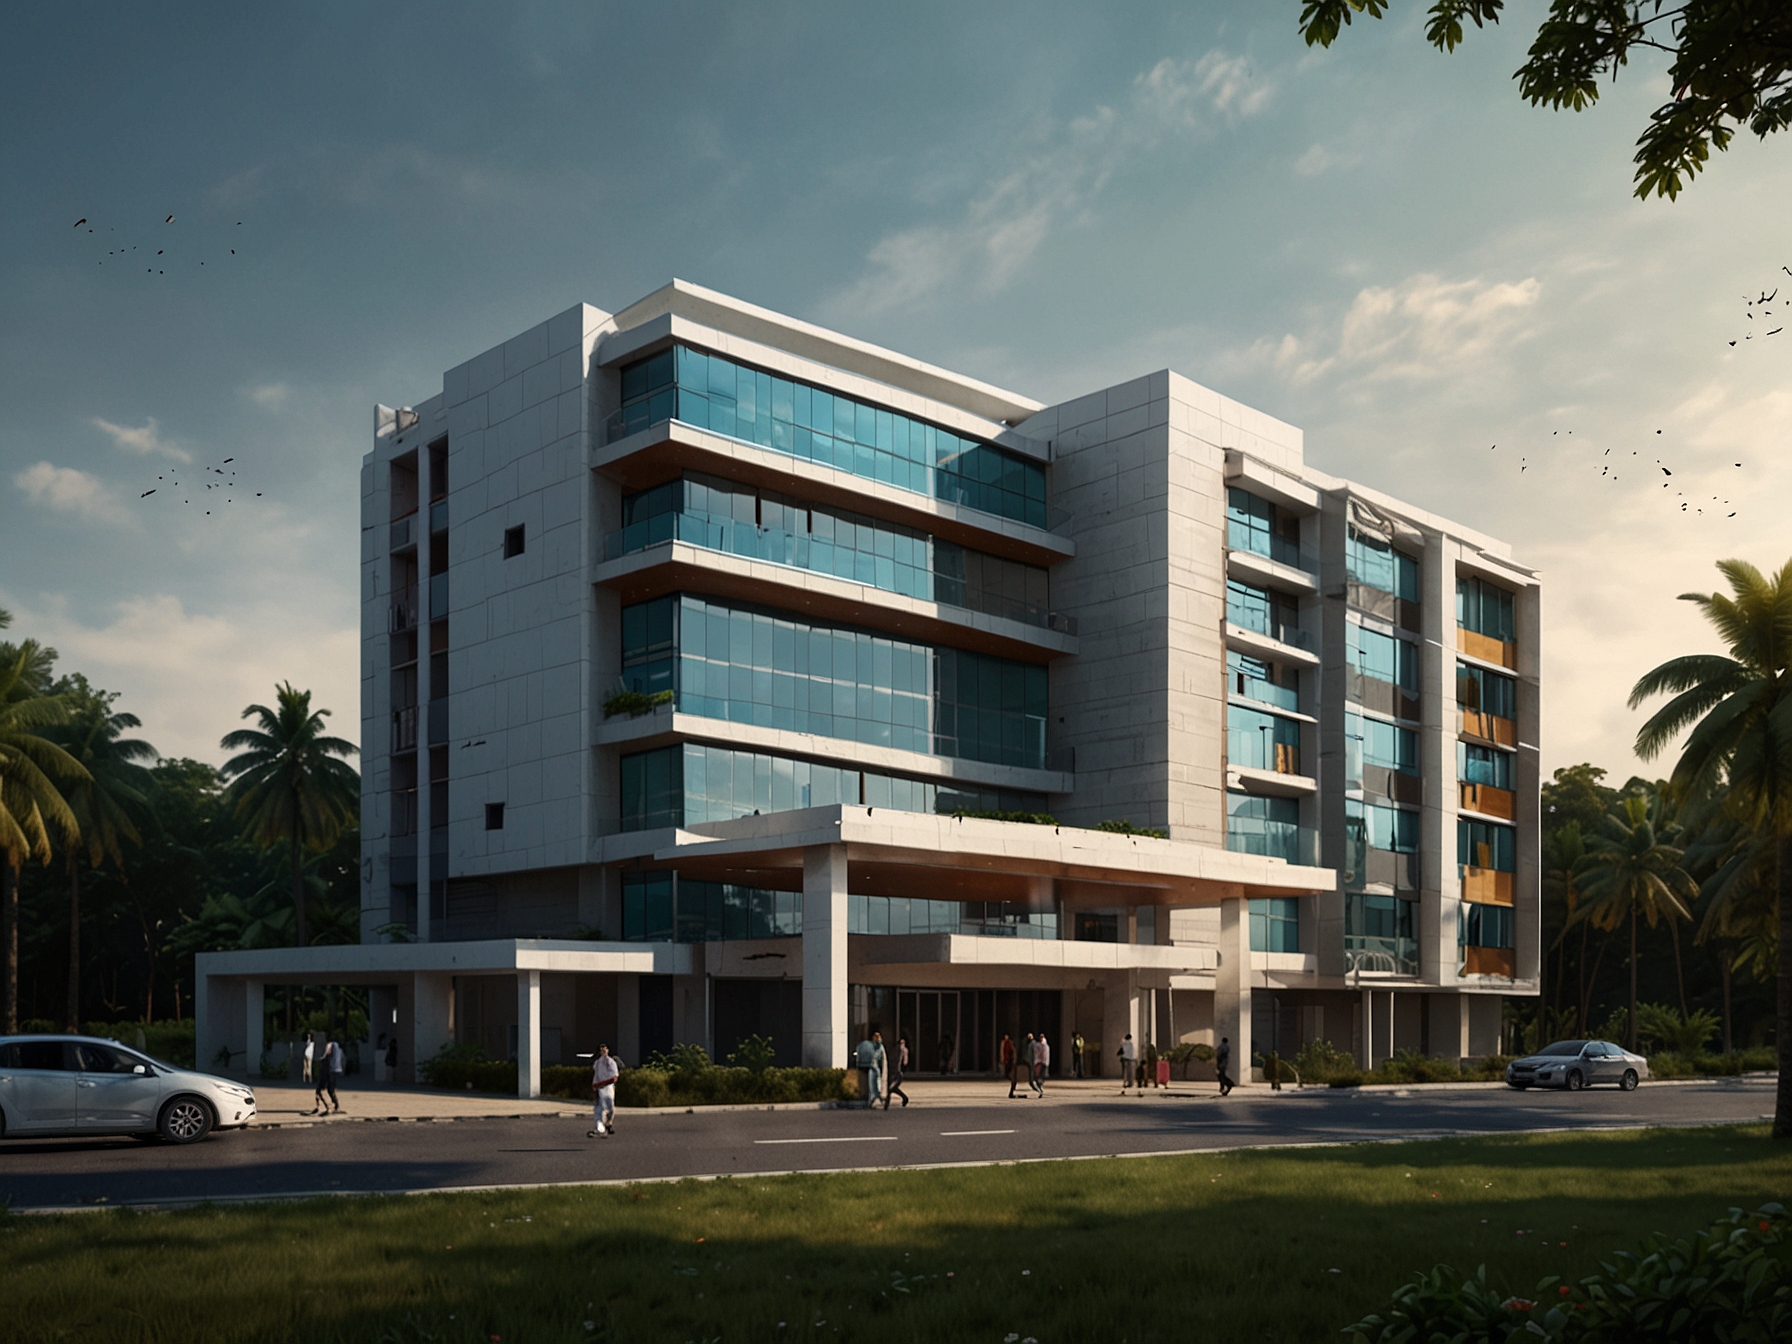 An impressive modern hospital building in Kerala, symbolizing the significant investment by KKR aimed at improving healthcare infrastructure and services.